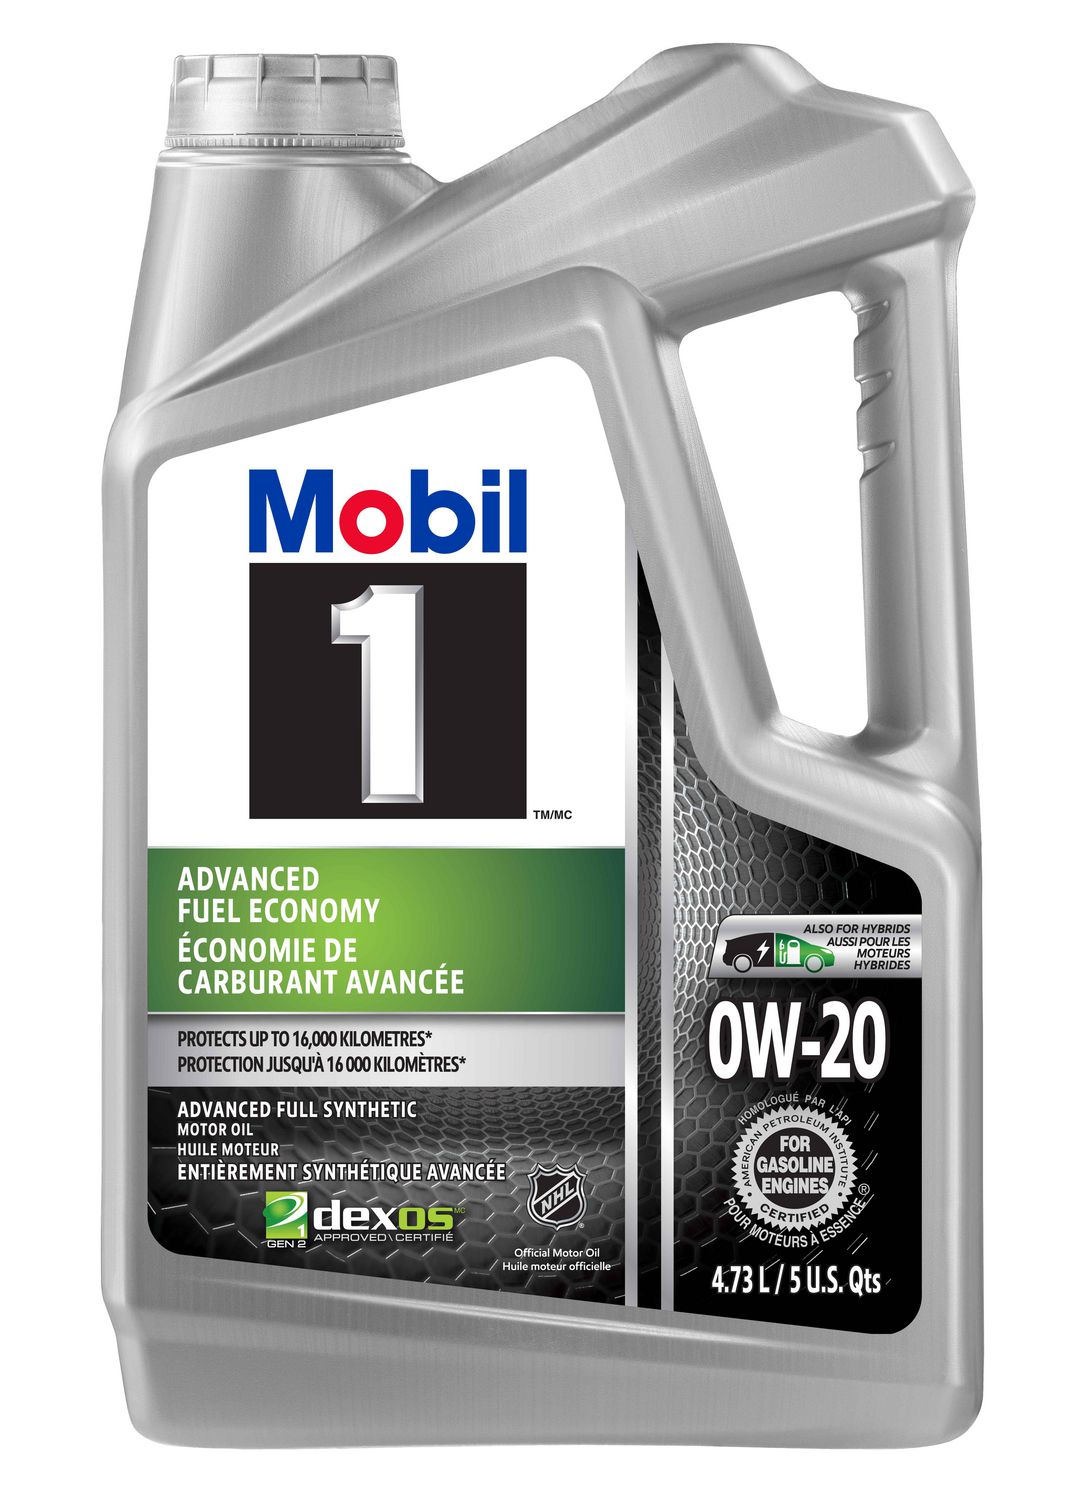 mobil-1-advanced-fuel-economy-full-synthetic-engine-oil-0w-20-4-73-l